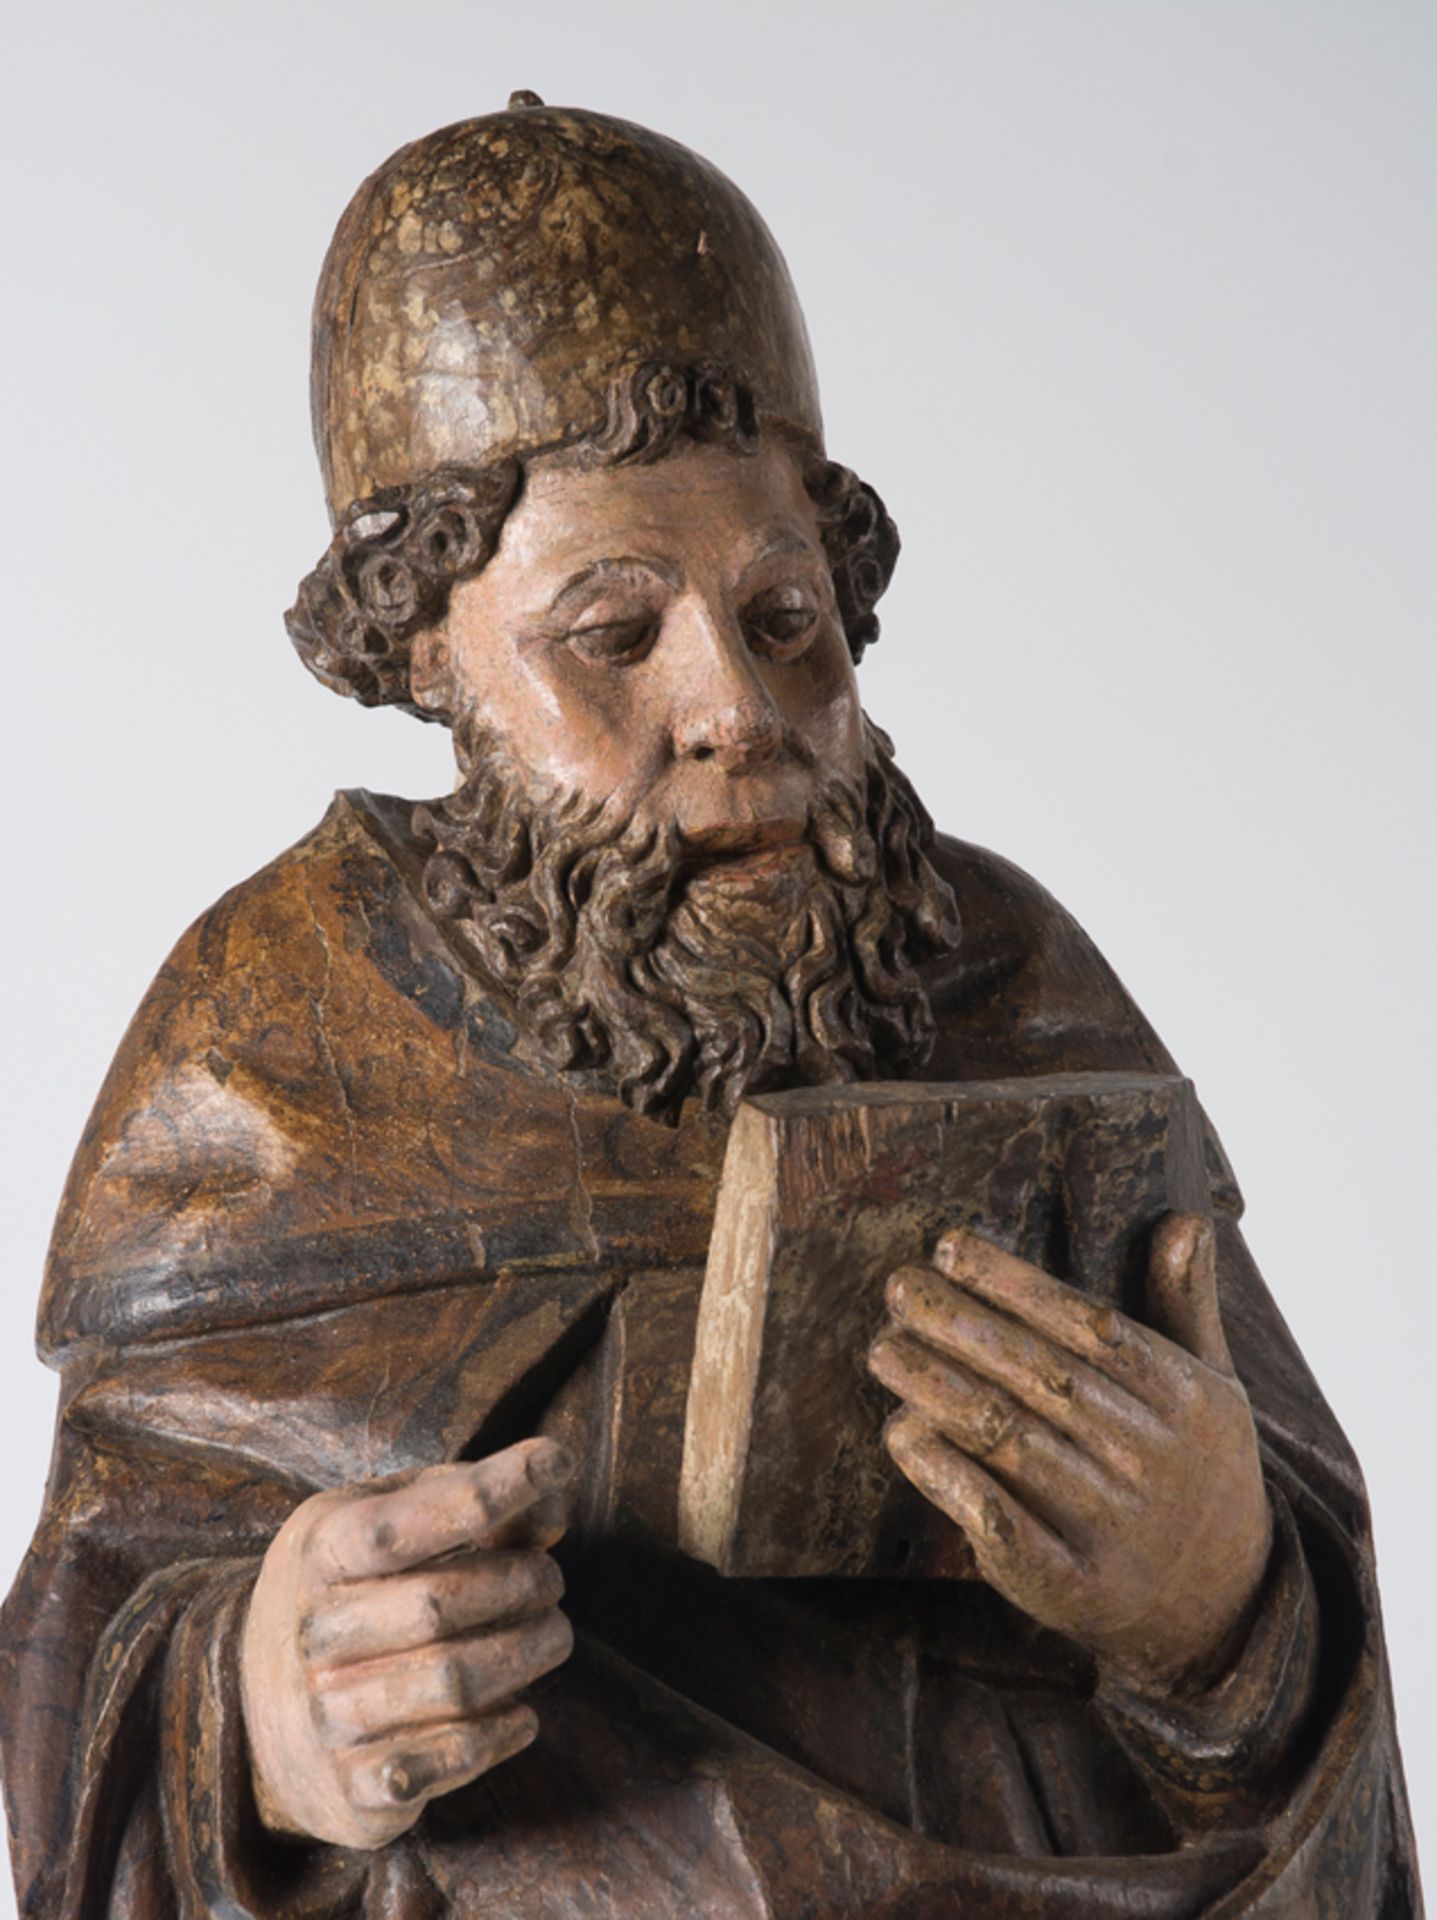 "Saint Anthony". Carved wooden sculpture. Castilian School. 15th century. - Image 4 of 10